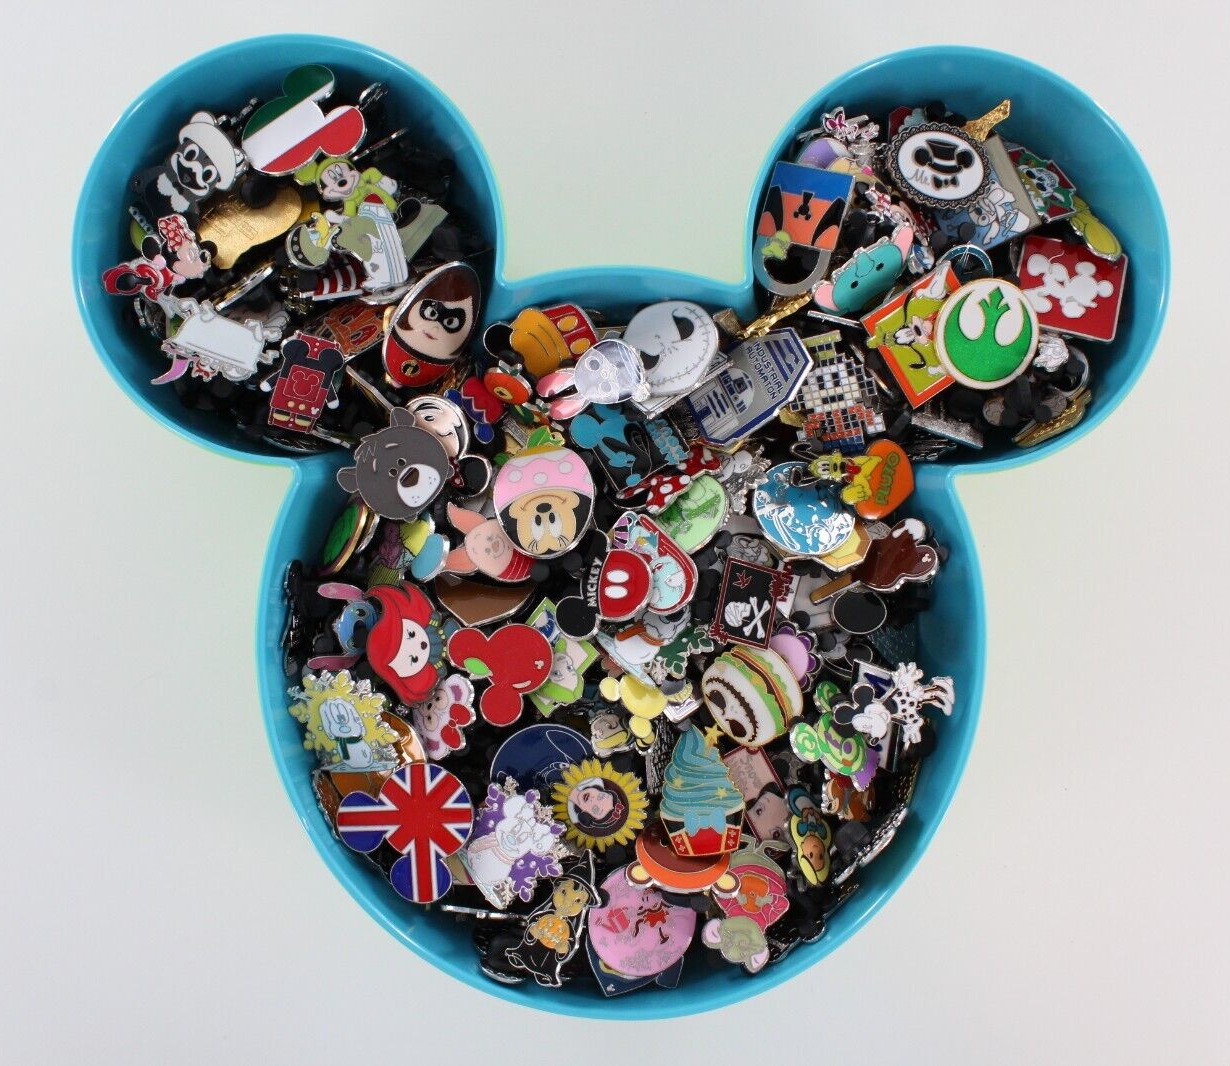 Disney Trading Pin Lot Assorted Pins - Choose Your Size Lot - TRADABLE PINS  - Enamel/Metal Set Mickey Backing - Disney Pins Collector - Pin Book 